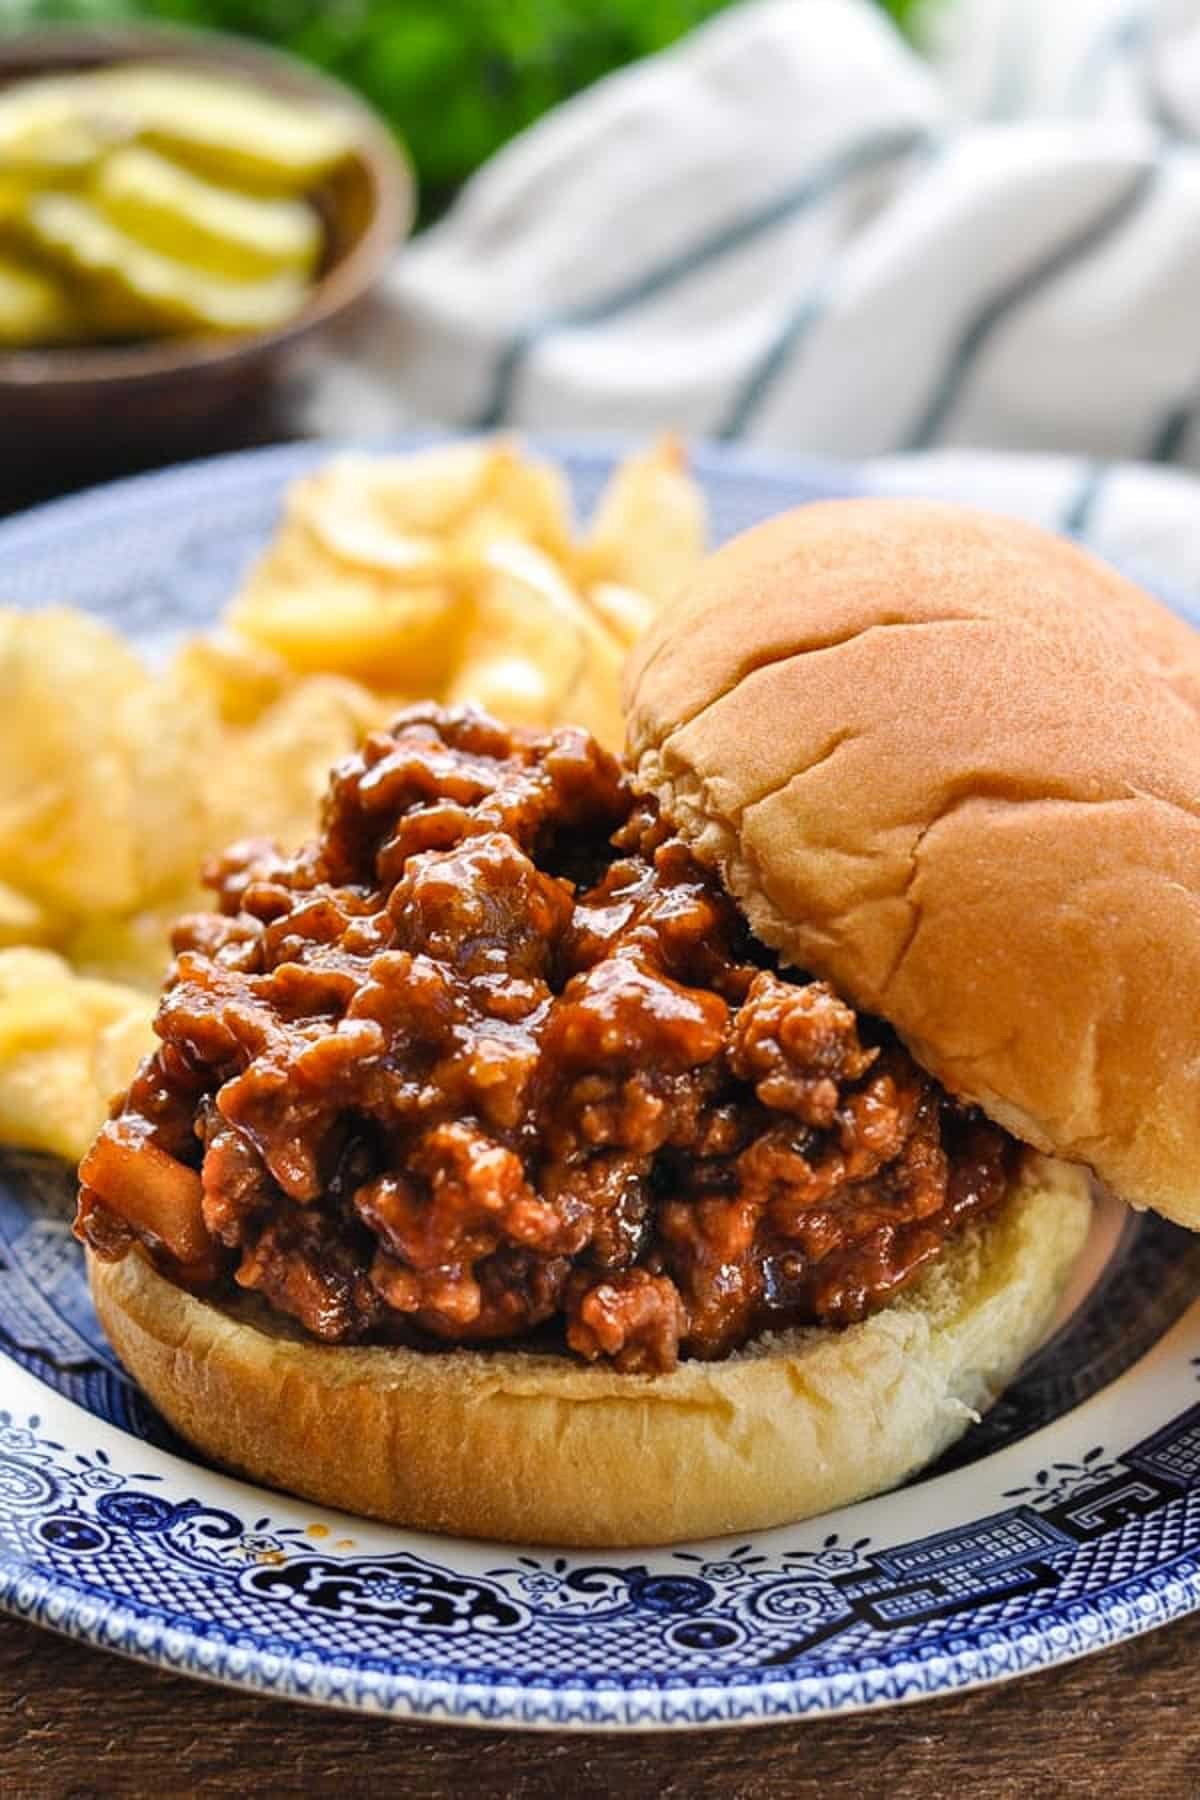 Side shot of an old fashioned sloppy joes recipe served on a sandwich bun with pickles and potato chips.